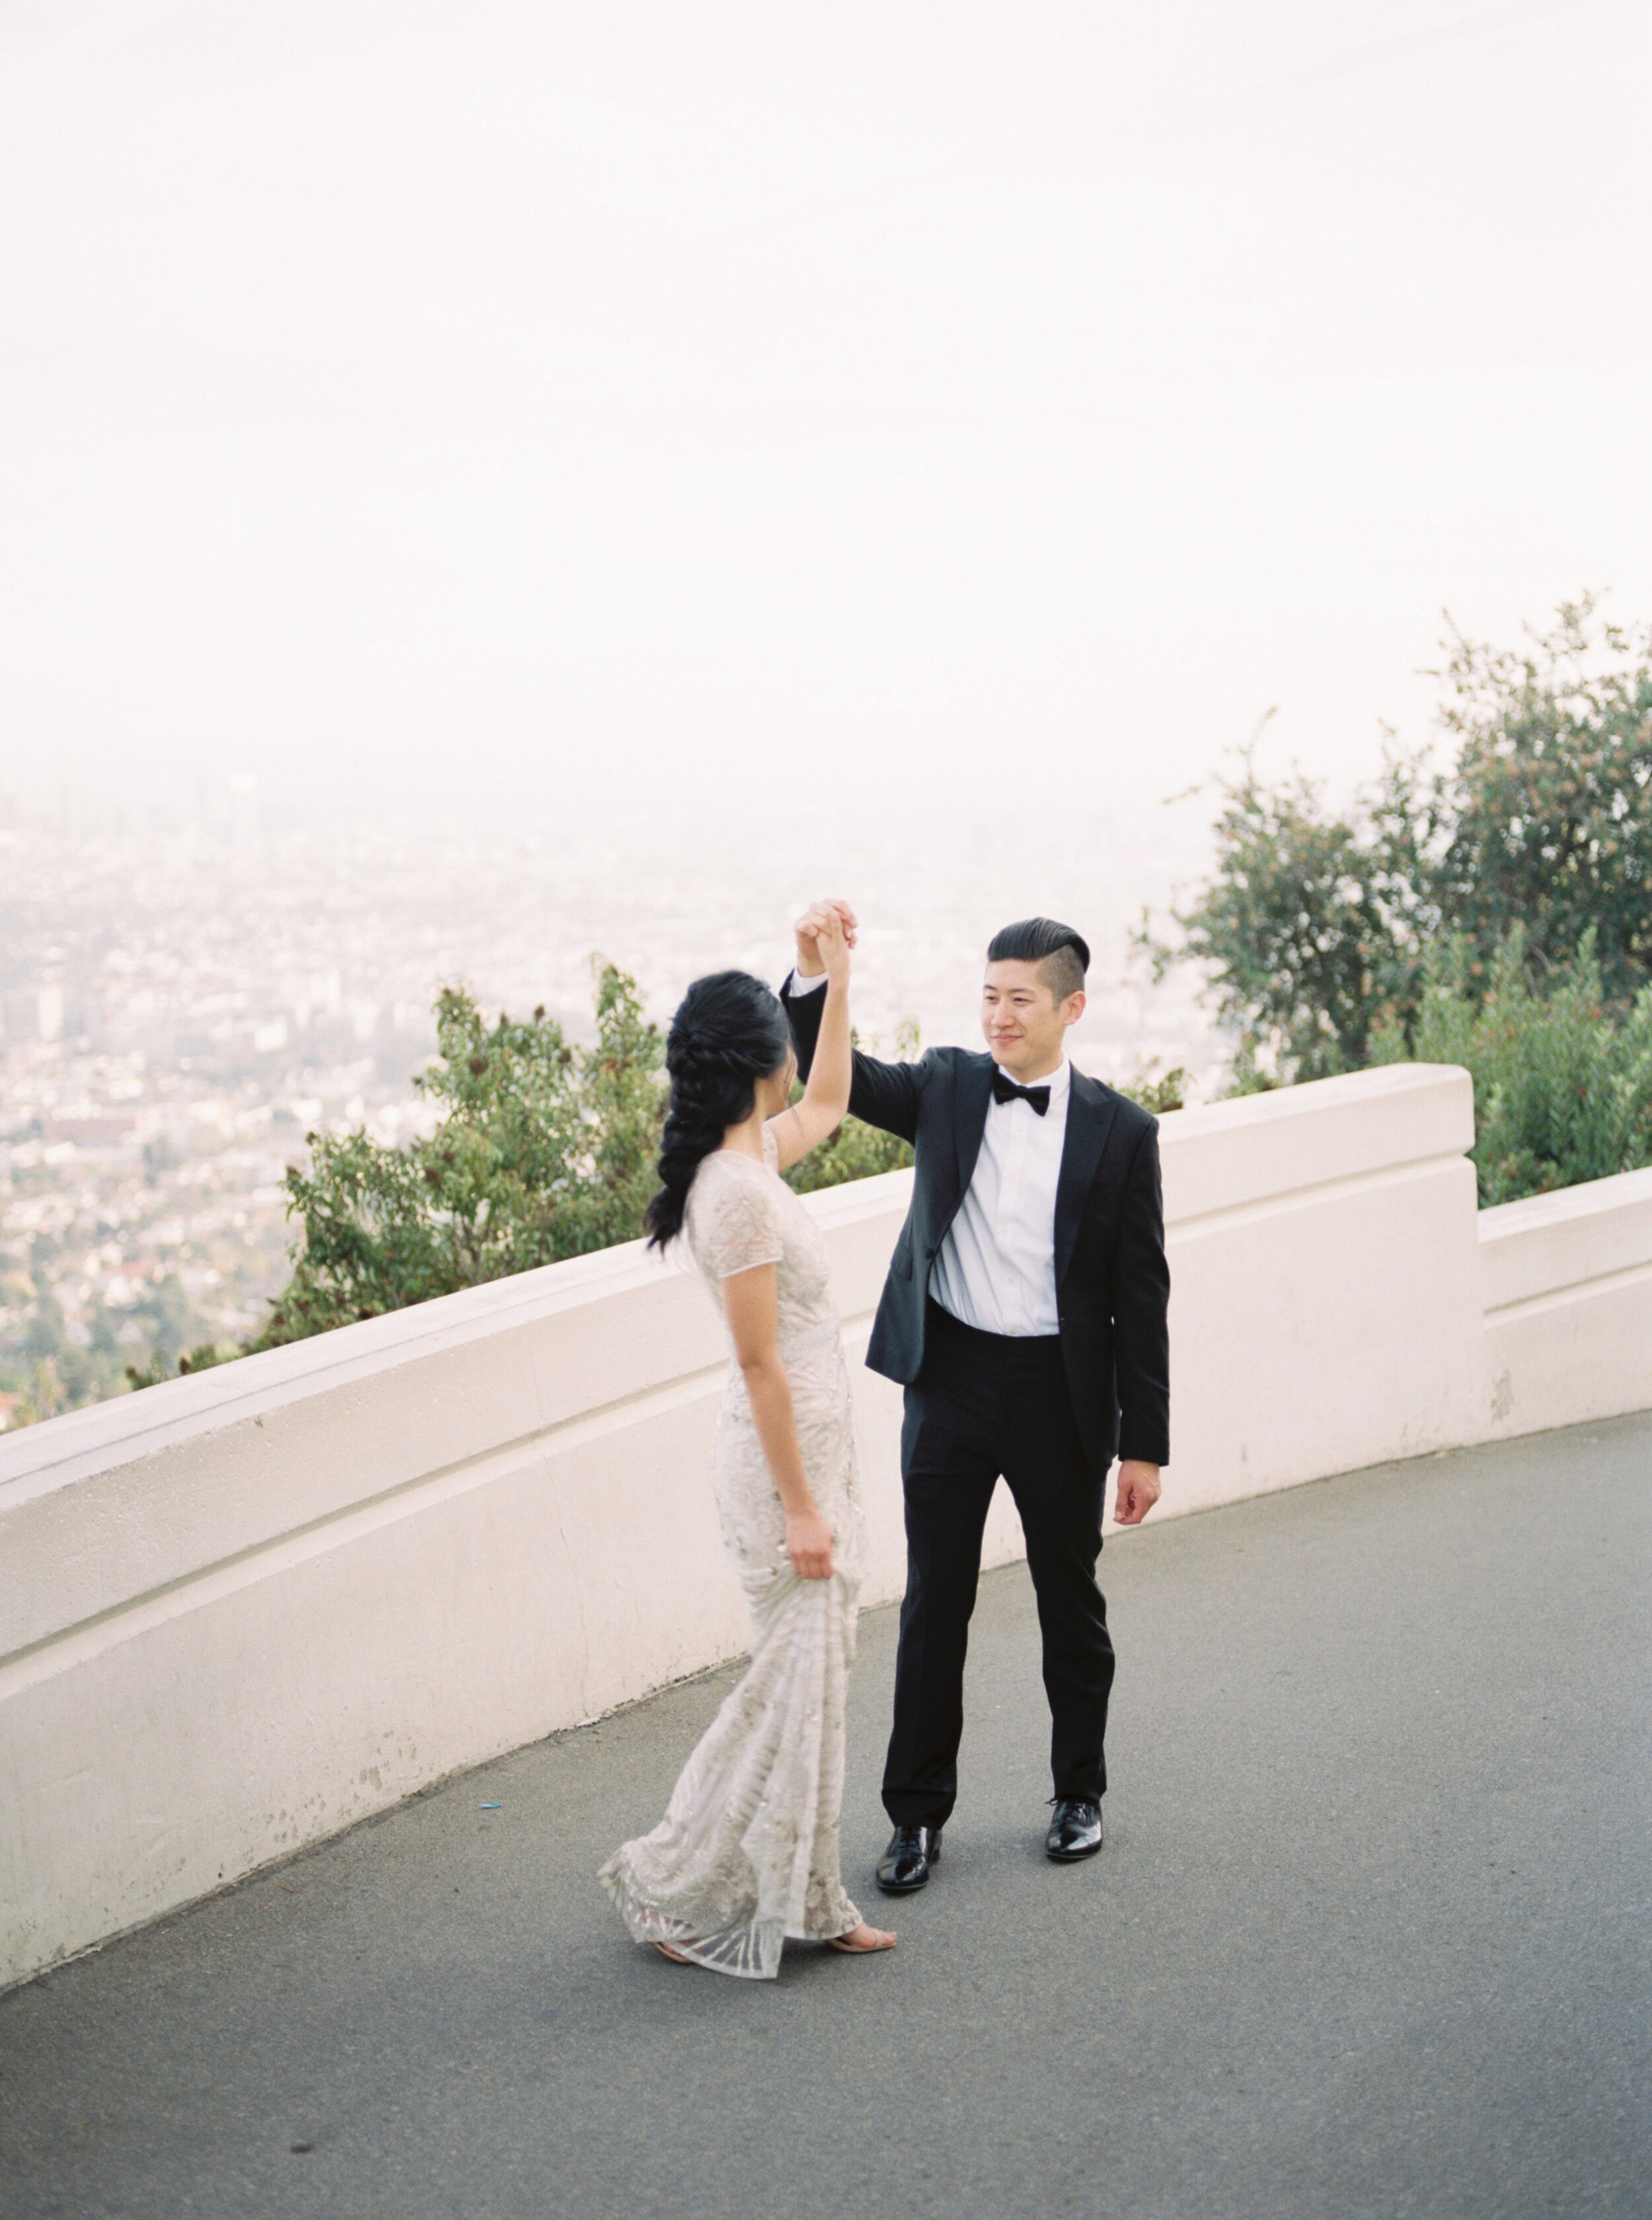 Elegant and romantic old Hollywood wedding with beaded Naeem Khan wedding gown, white organic florals, and epic sunset views at Griffith Observatory in Los Angeles by Liz Andolina Photography